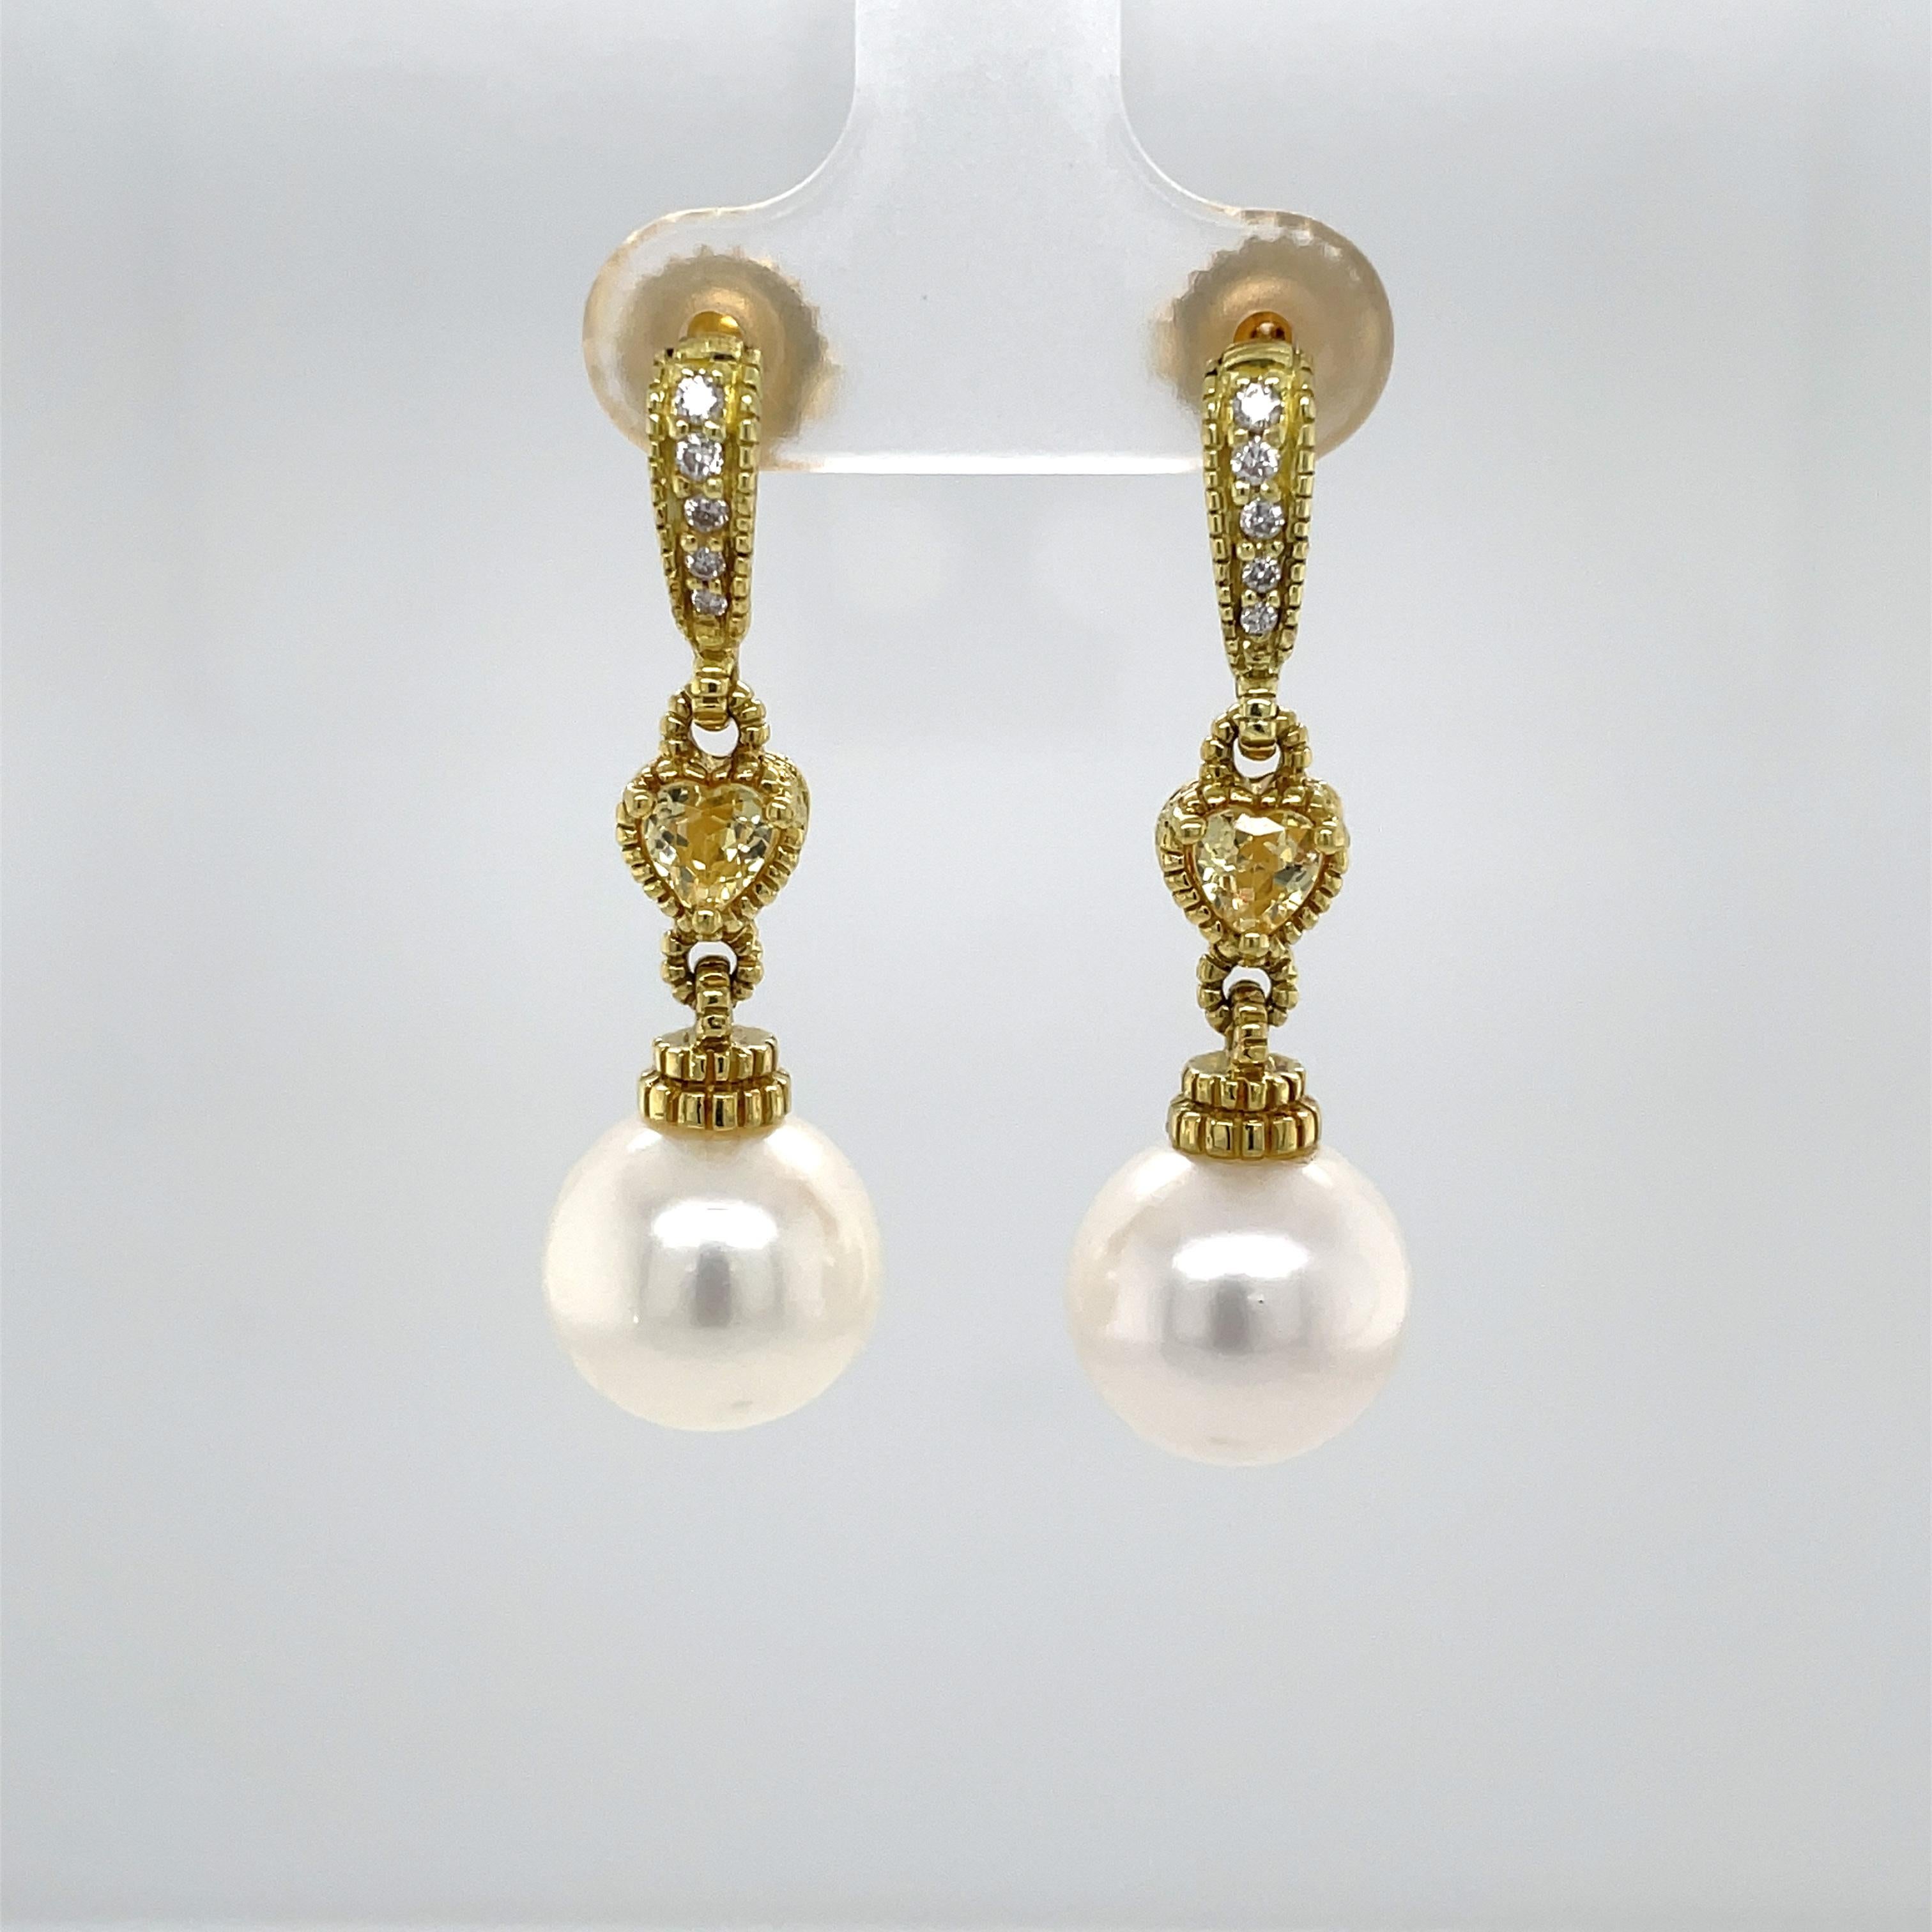 Sparking diamonds and warm yellow citrine heart shaped accents adorned this elegant pair of eighteen karat 18k yellow gold pearl drop earrings by well known jewelry designer Judith Ripka. Showcasing dangling round white 11 mm AAA freshwater culture